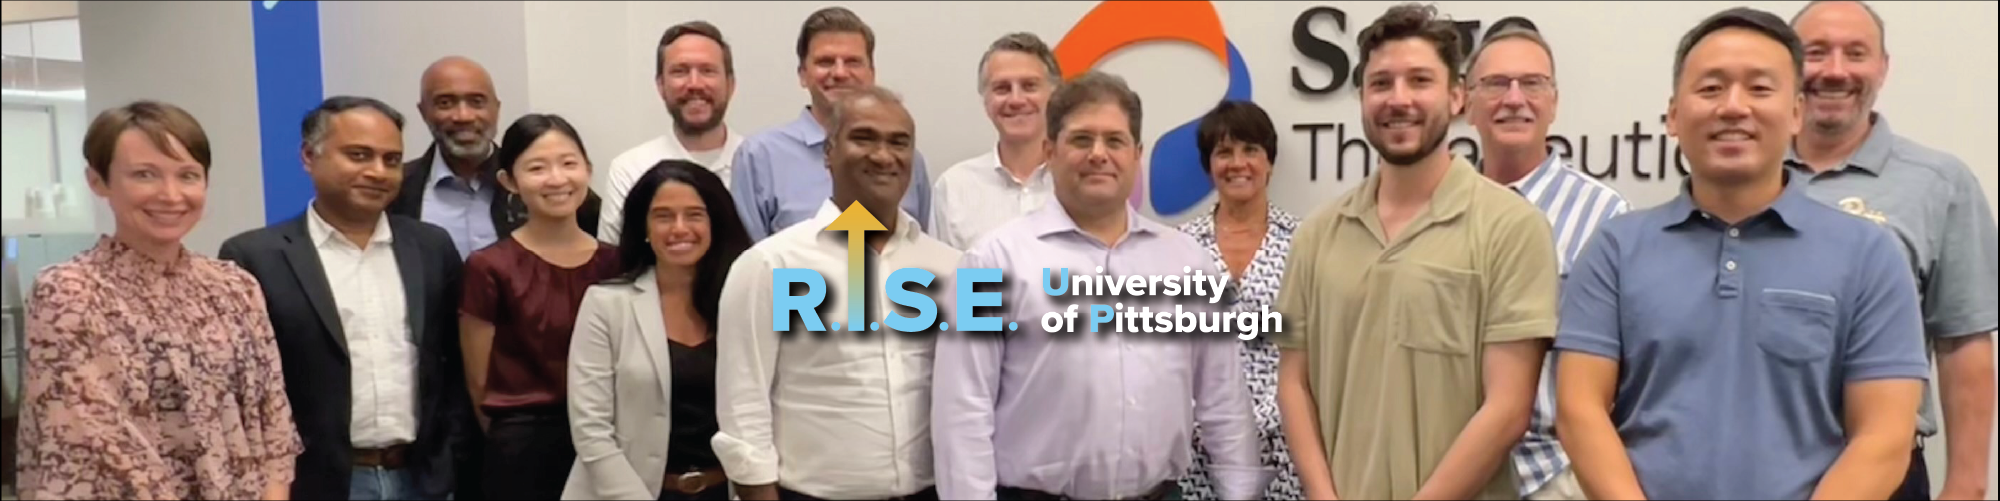 group photo of the rise-up study directors